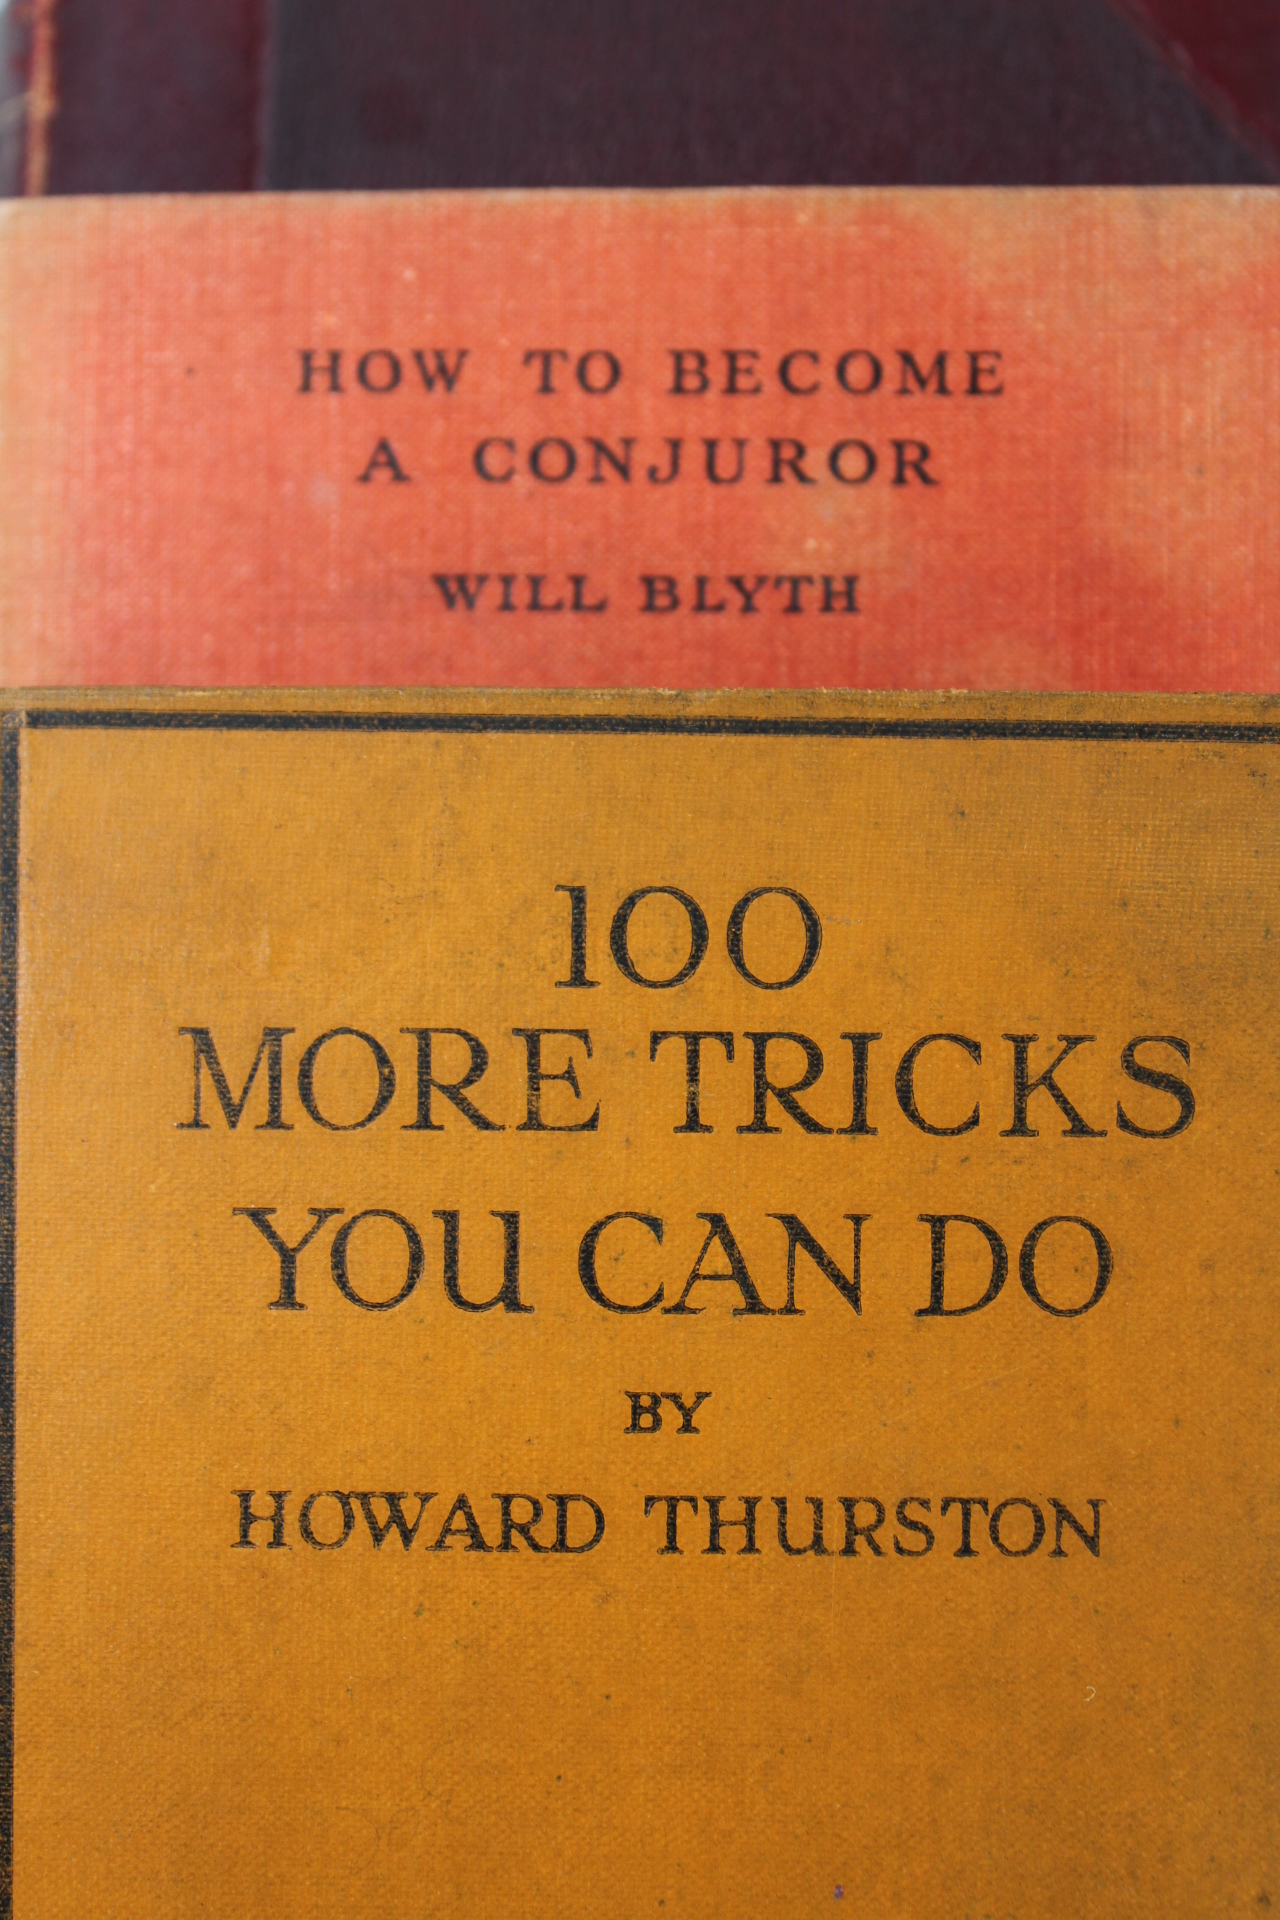 Will Blyth, 'How to become a conjuror', 1934, 1st edition, signed copy, Howard Thurston, - Image 2 of 2